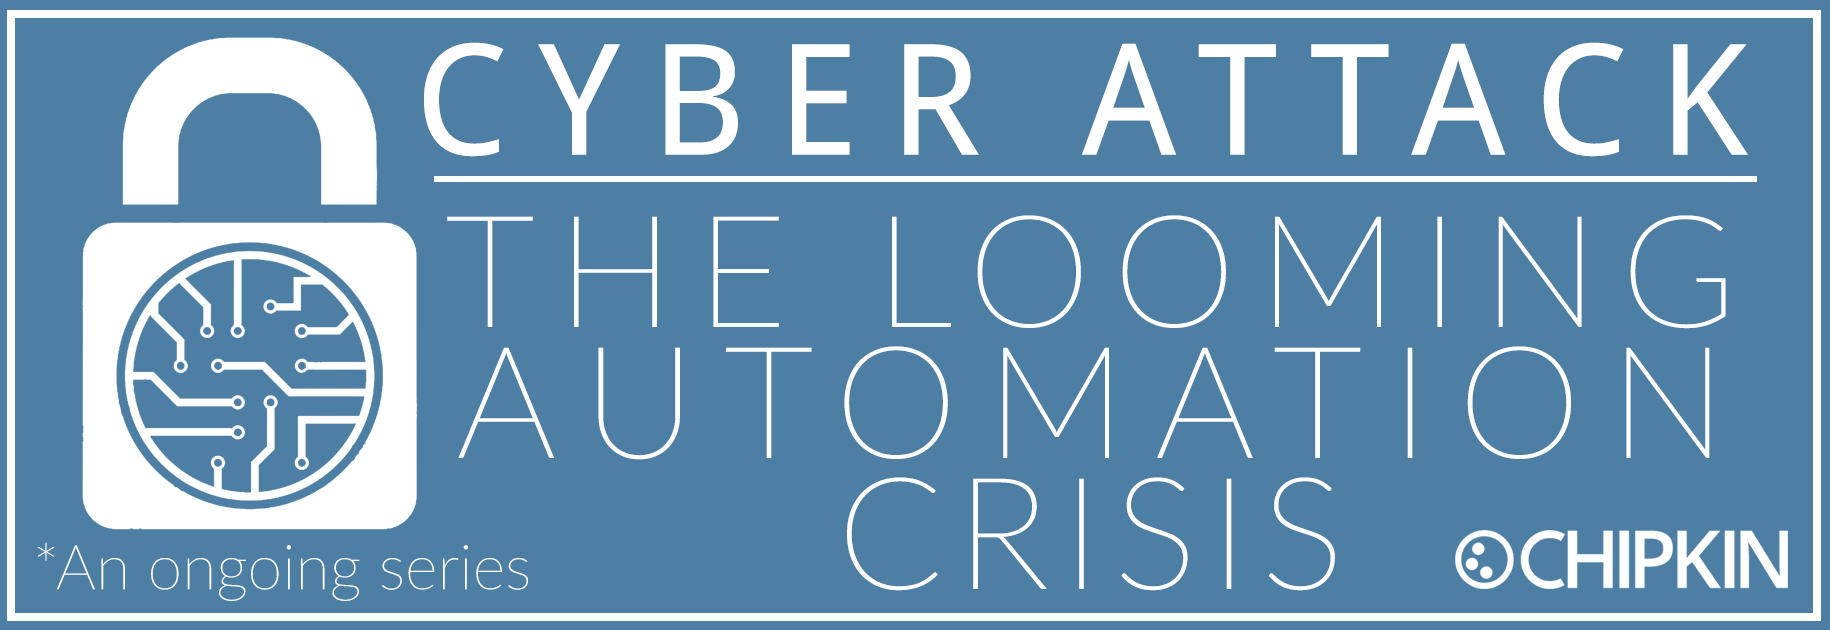 Cyber Attack; The Looming Automation Crisis - Bitcoin